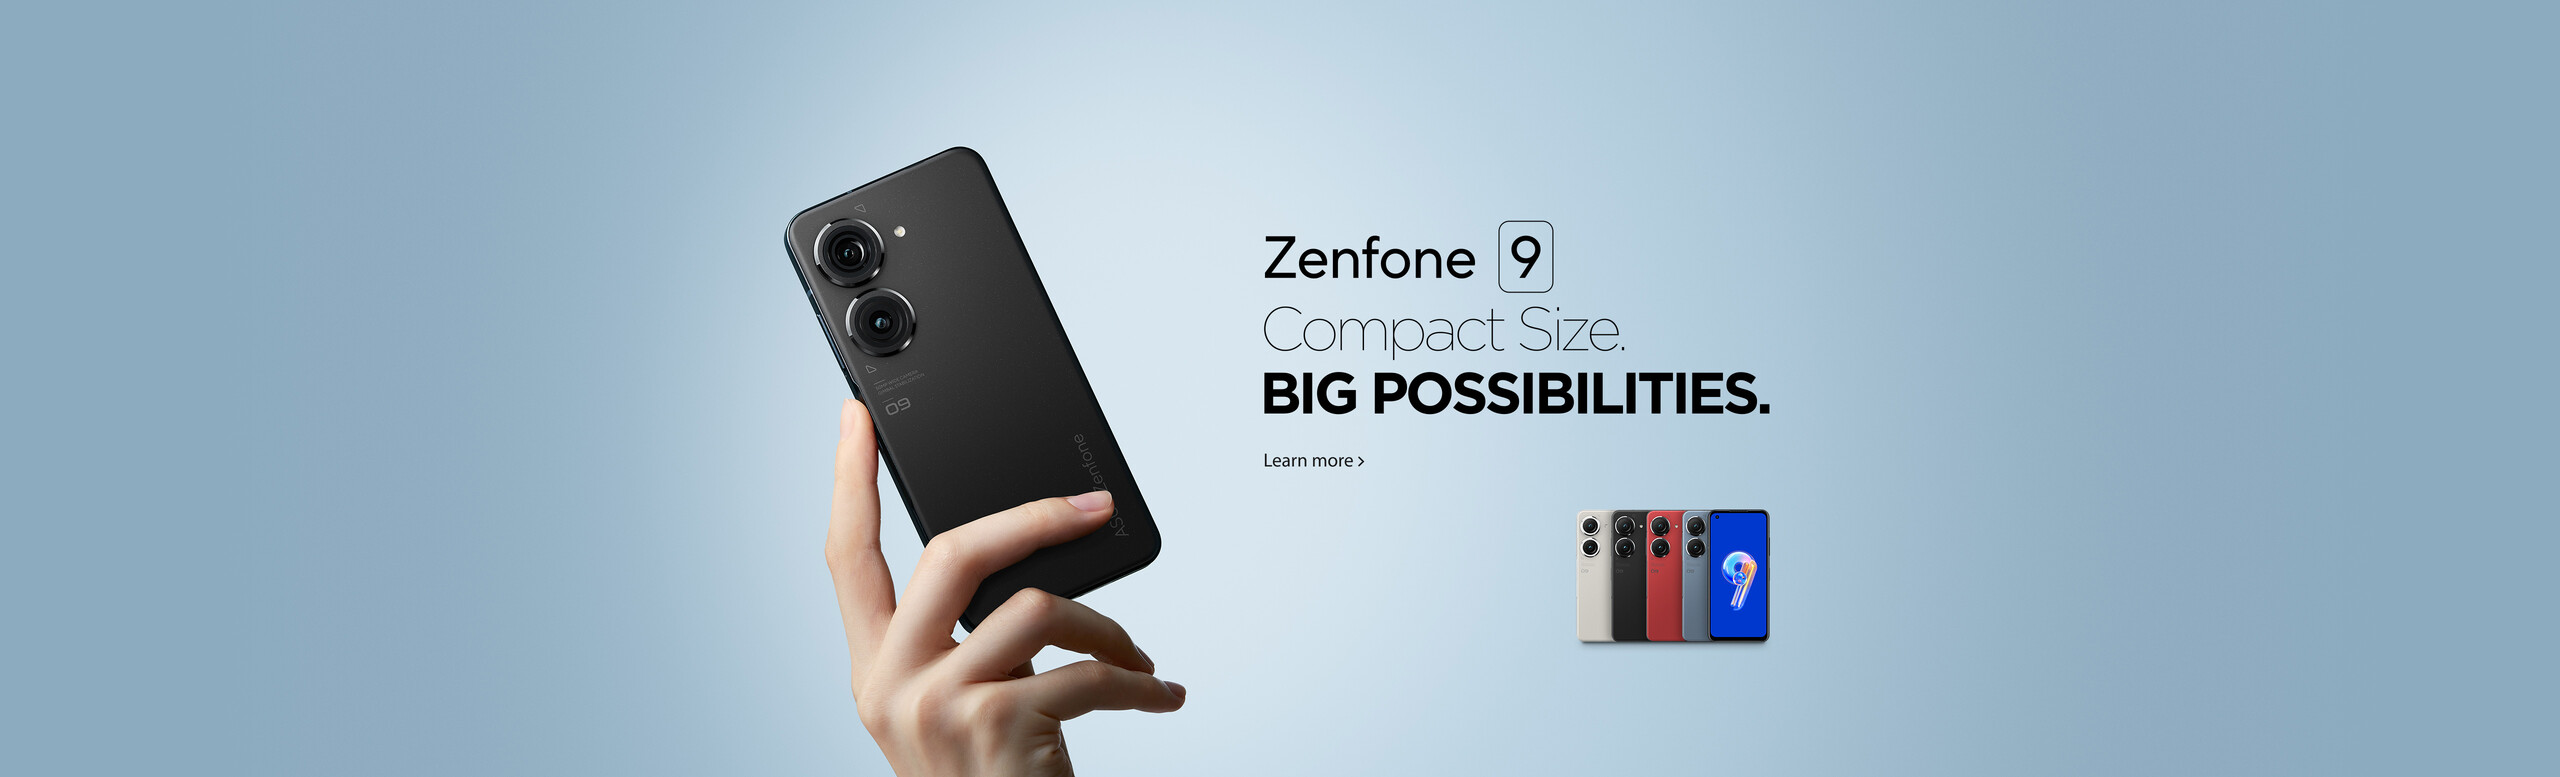 The right hand holding the Zenfone 9 displays its back cover in Midnight Black and there are five Zenfone 9 on the right down side showing 4 colors and the phone's front side.